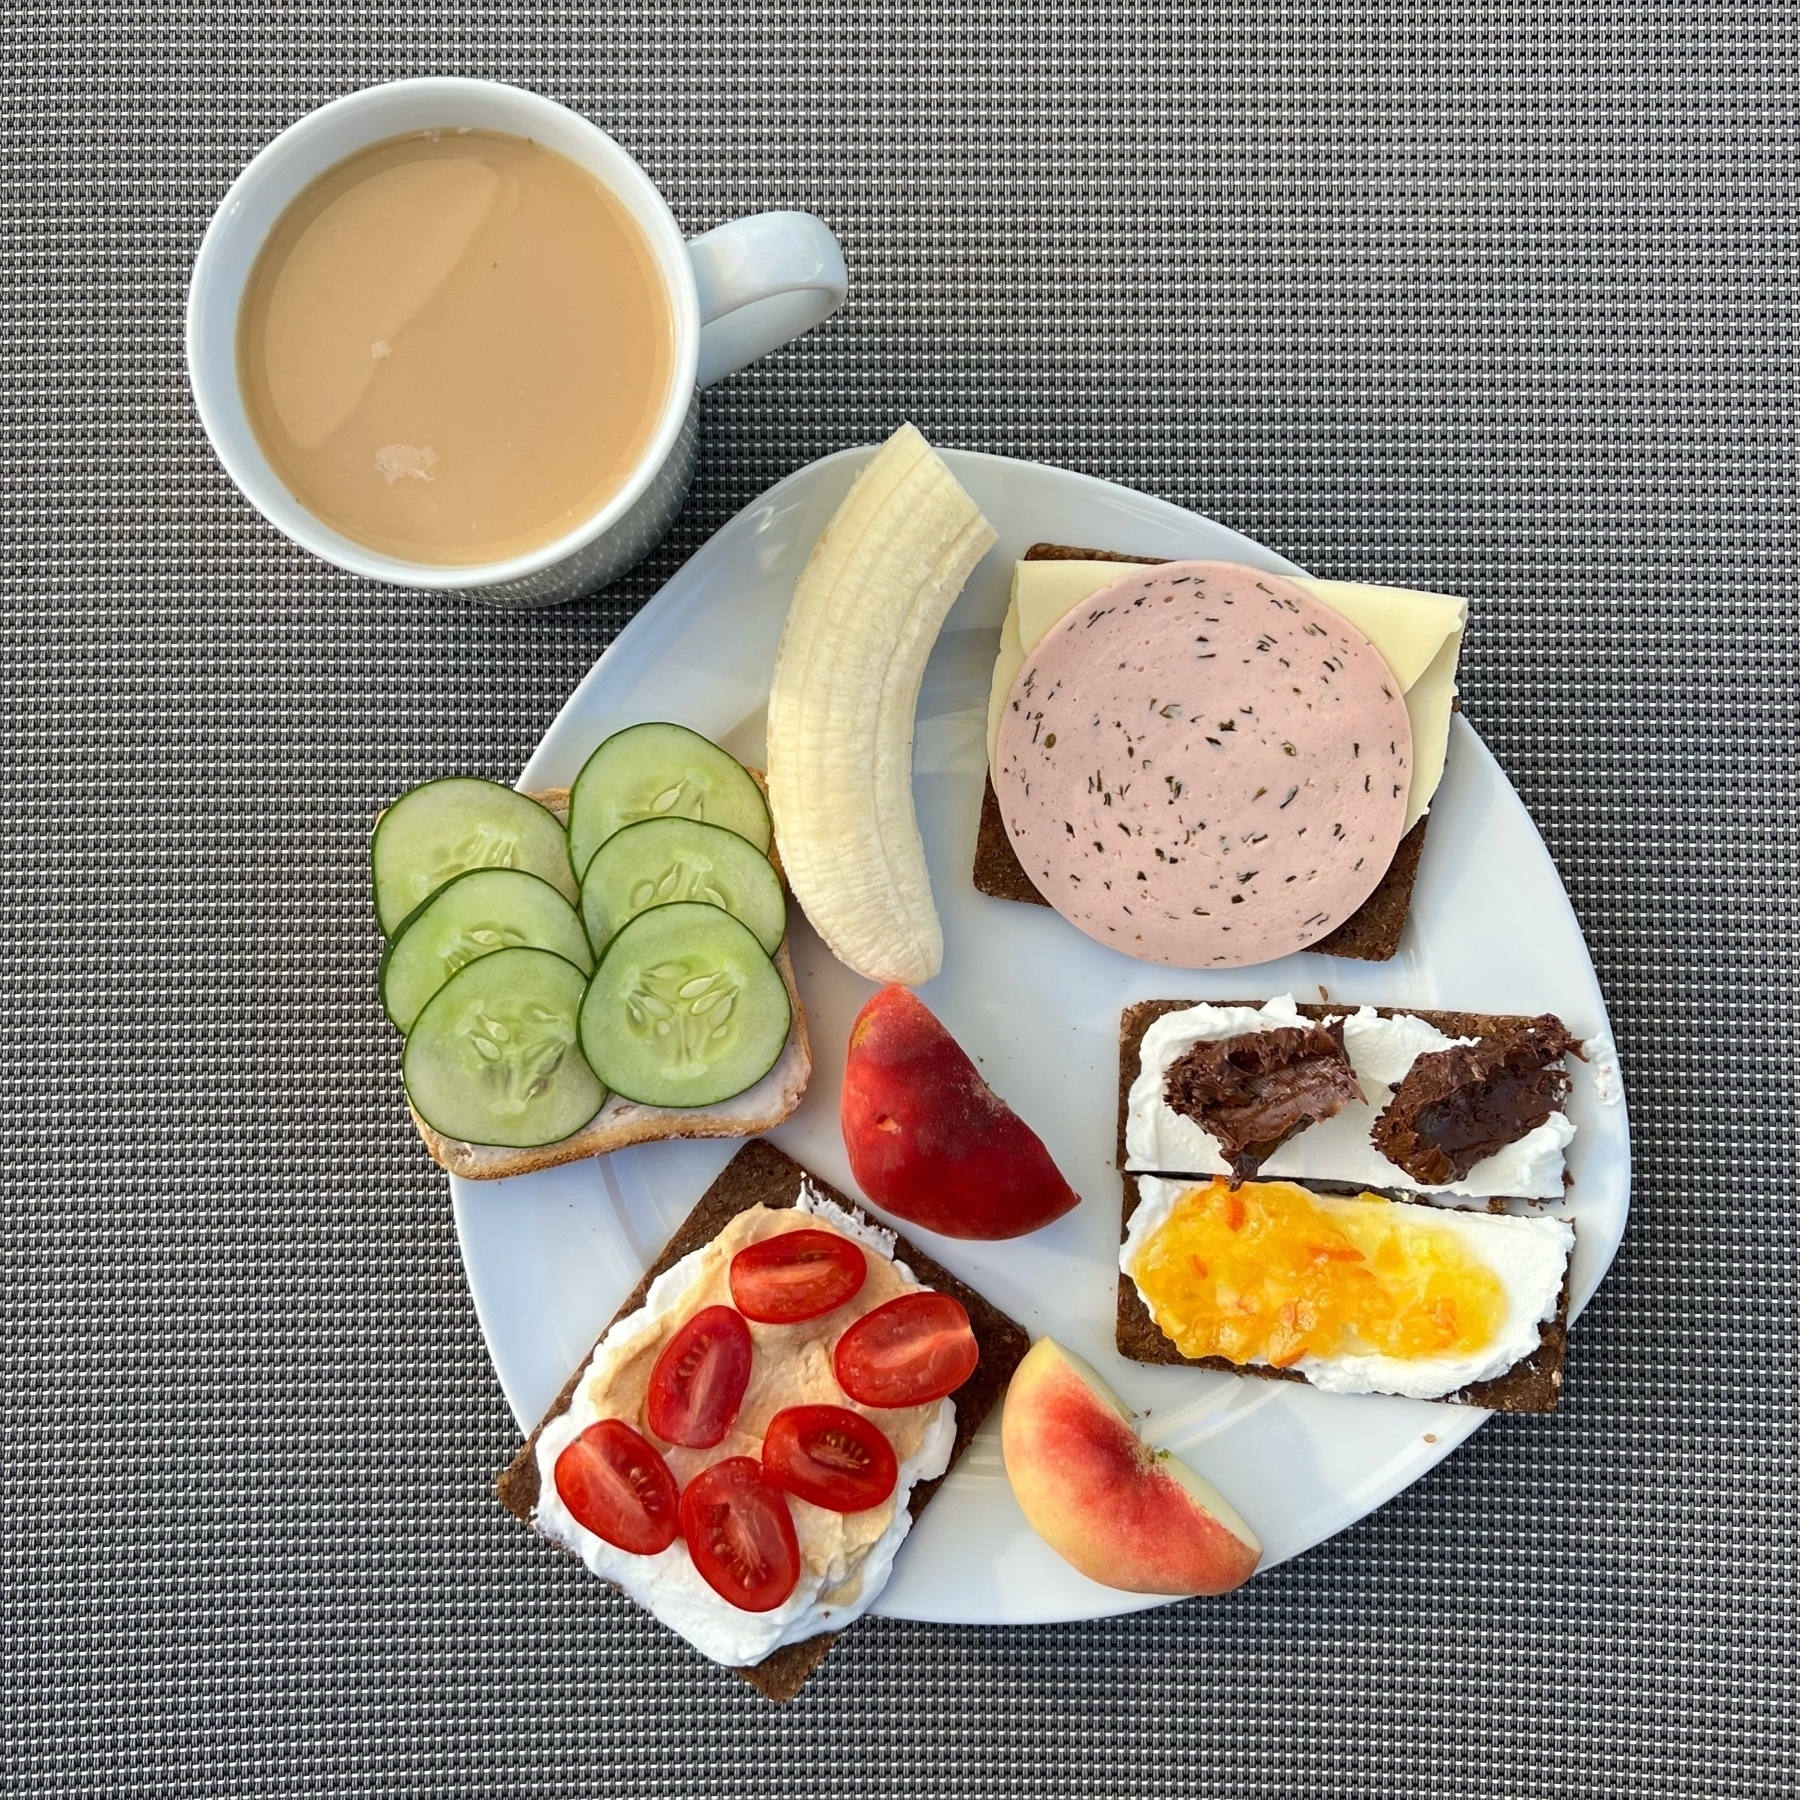 Plate with four pieces of bread with various toppings, half a banana and a doughnut peach, and a mug of coffee.